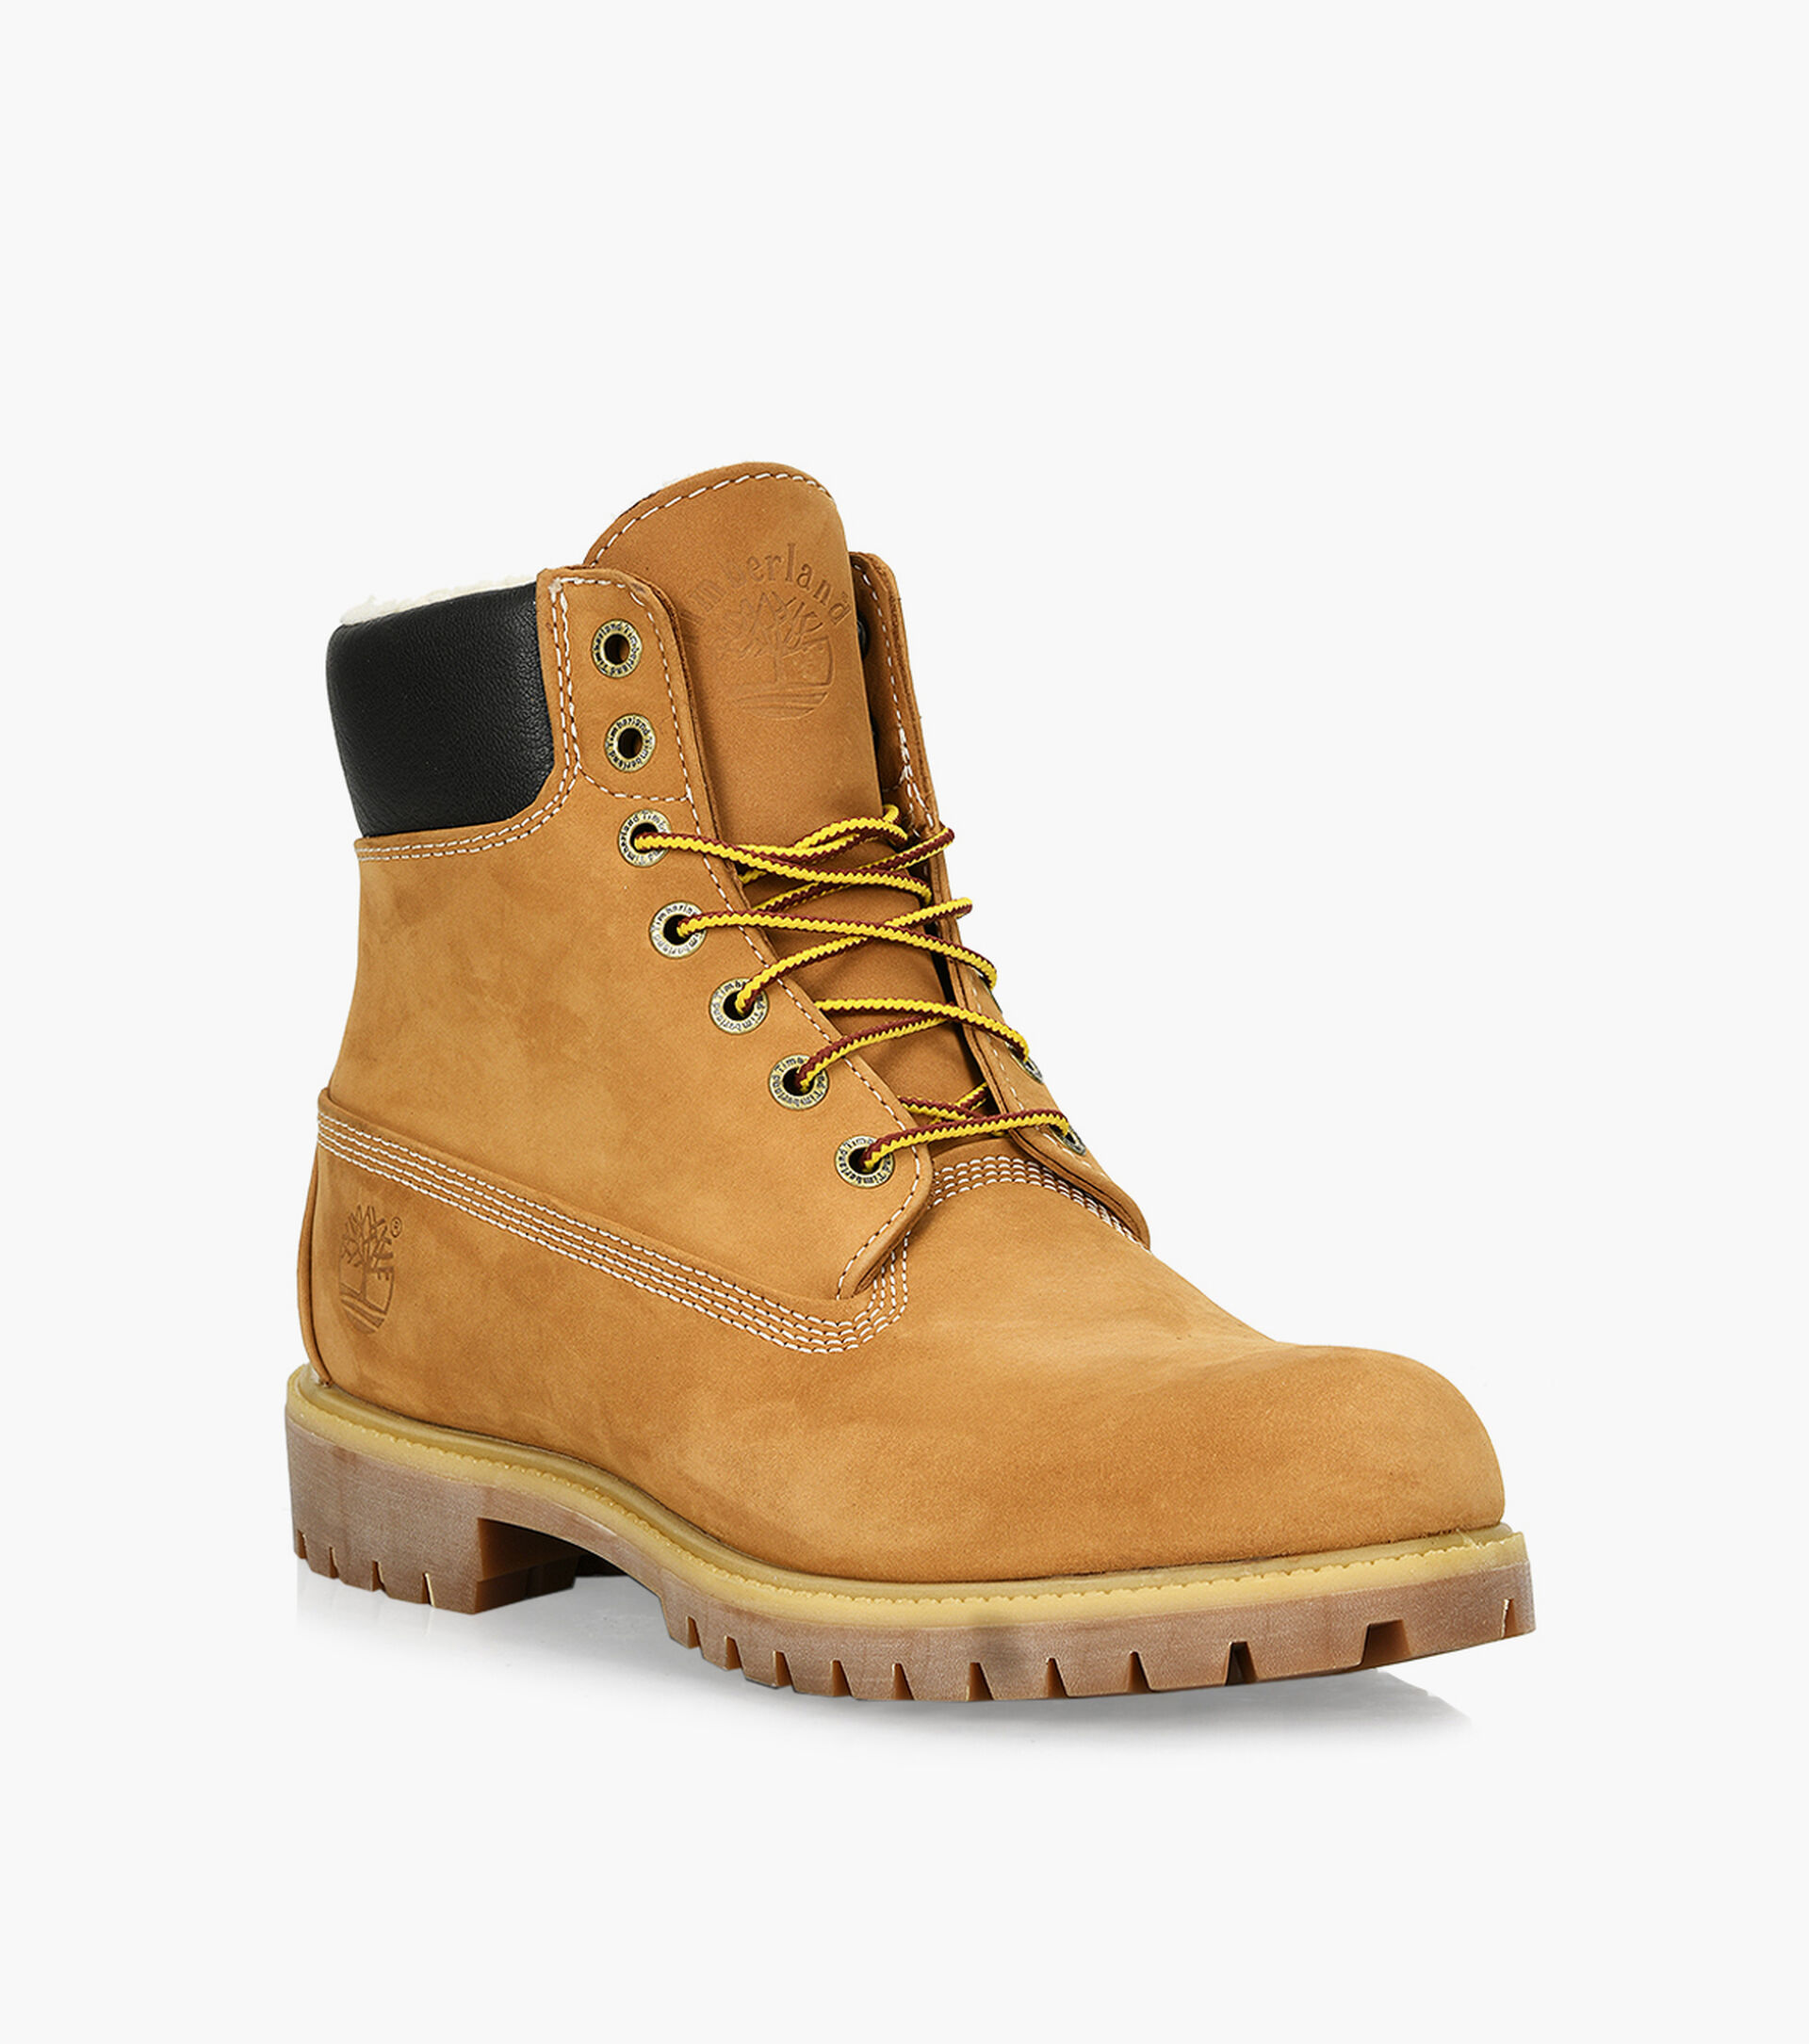 TIMBERLAND 6-INCH PREMIUM WARM LINED WATERPROOF BOOTS - Nubuck | Shoes